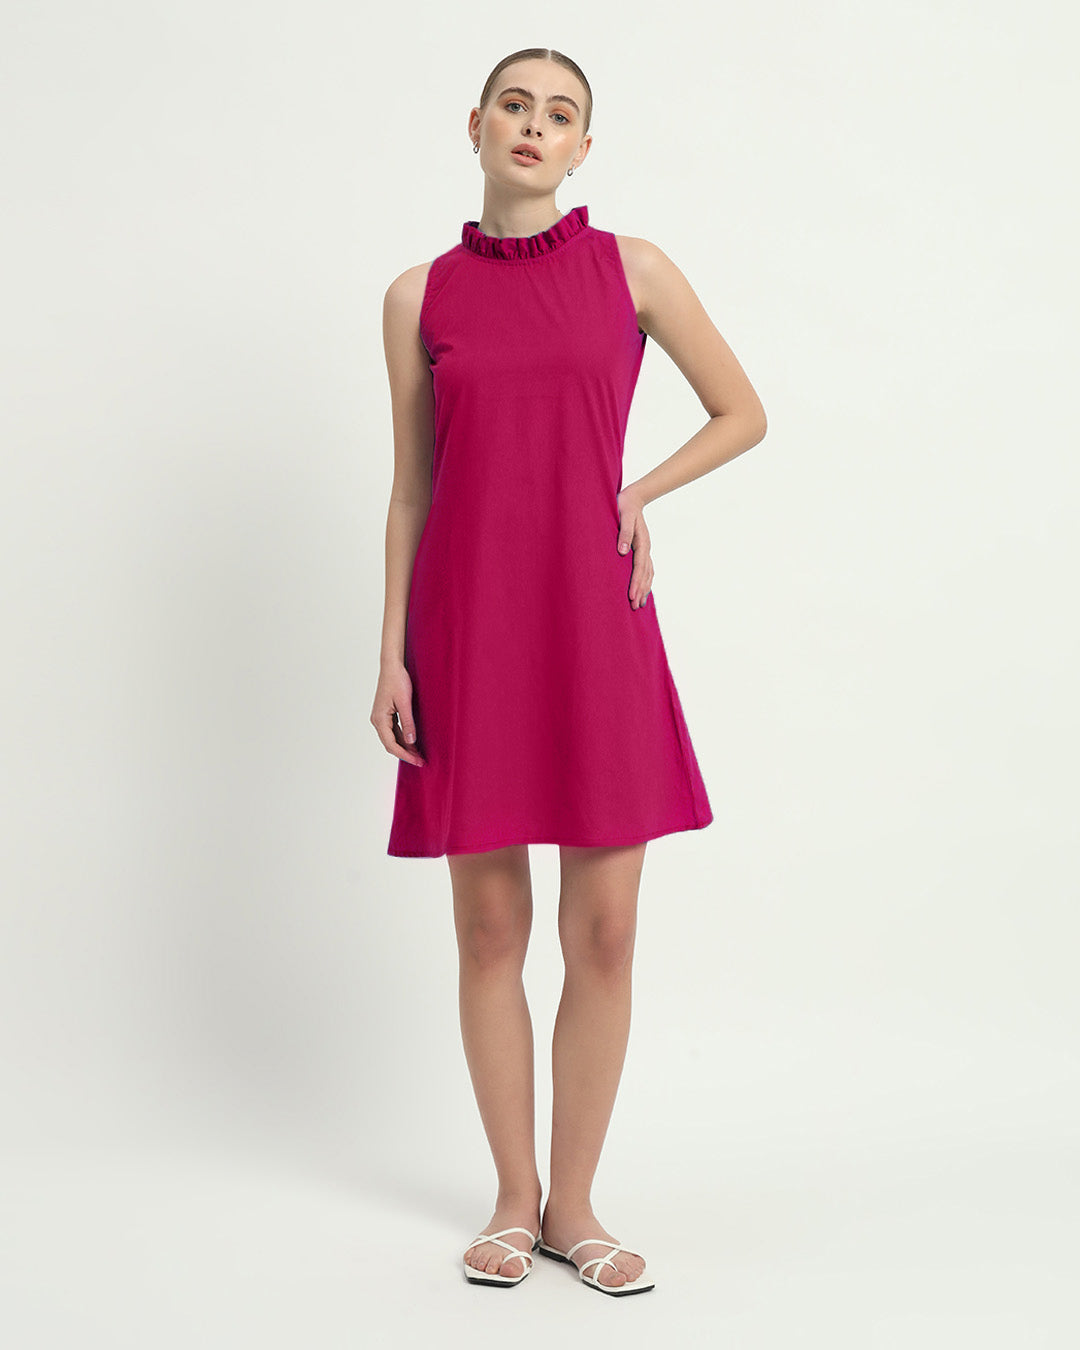 The Angelica Berry Cotton Dress